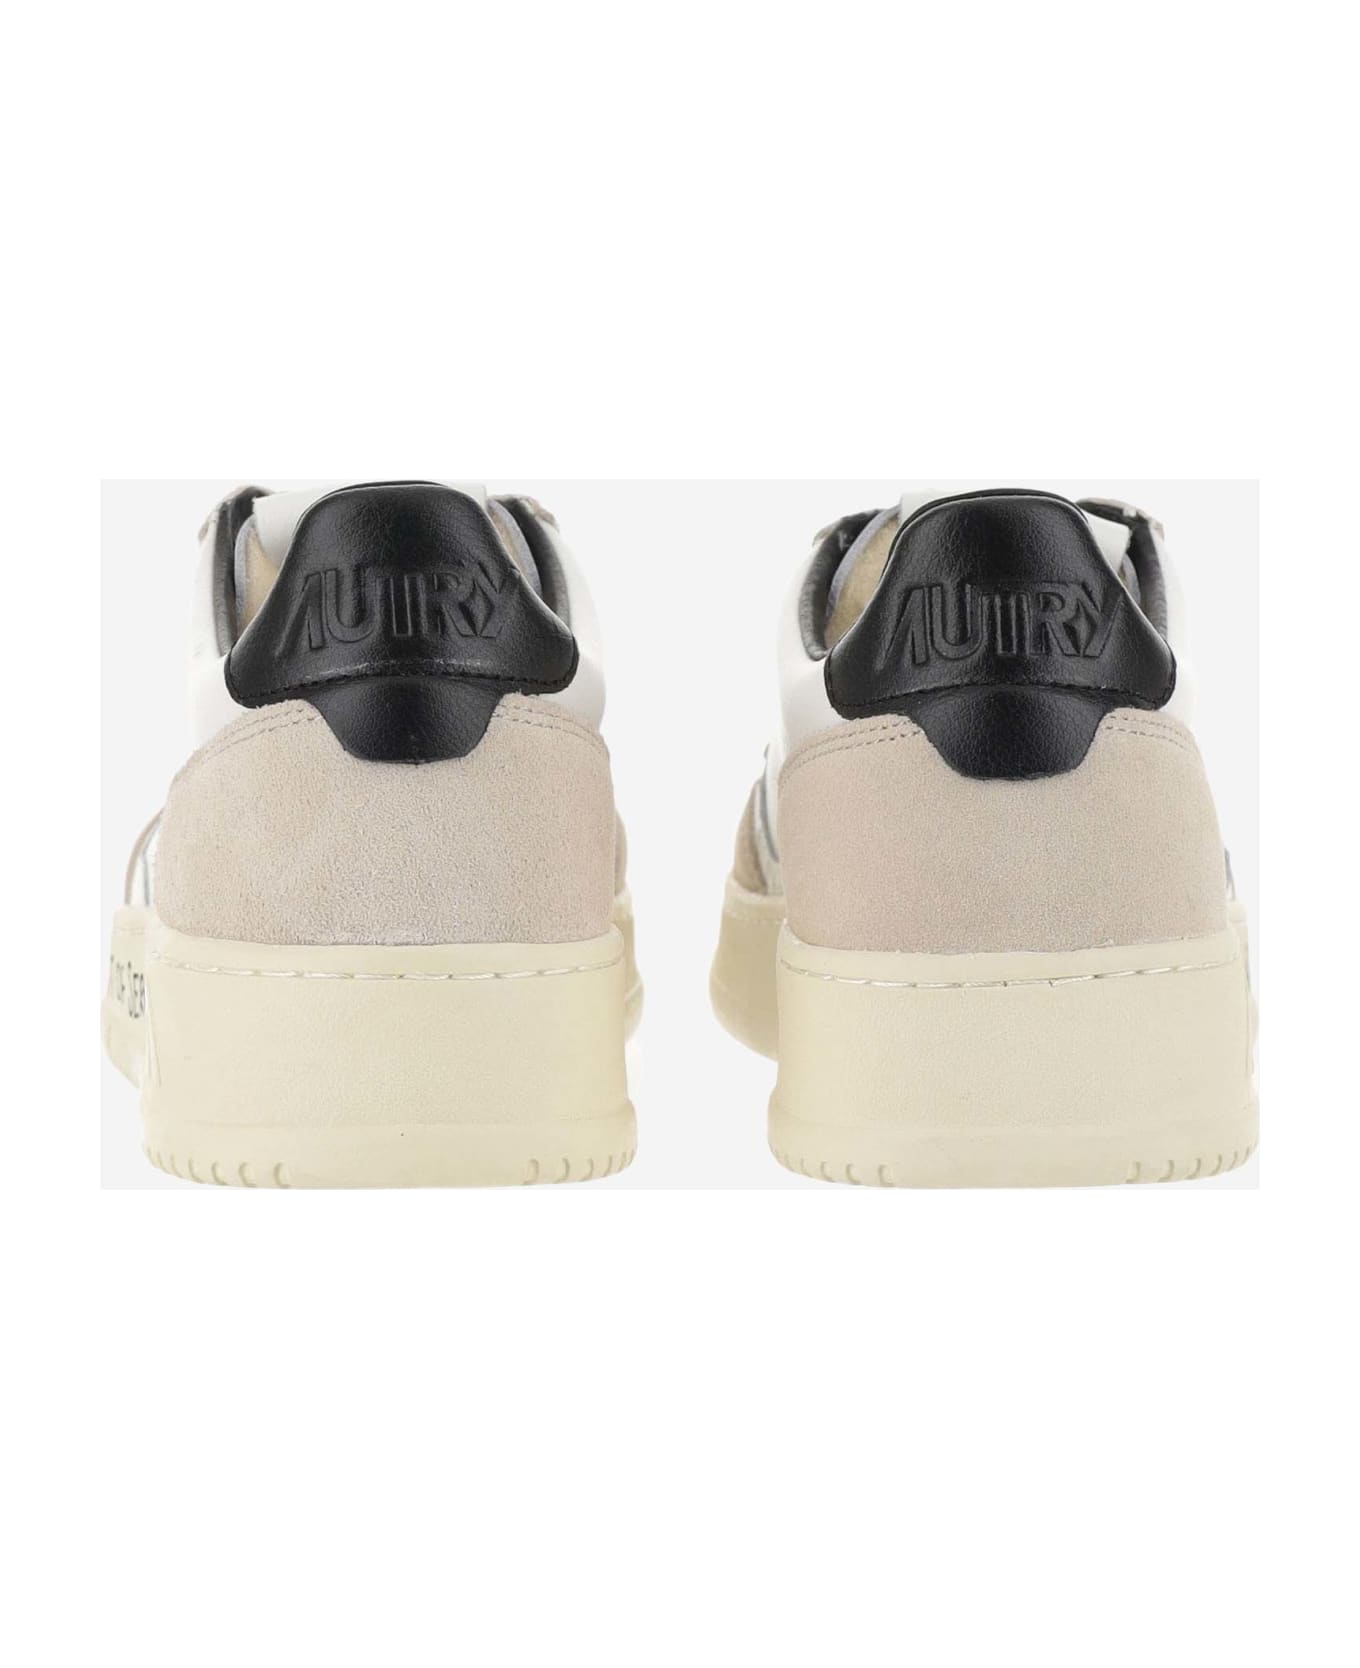 Autry Low Medalist Spirit Of Serve & Volley Sneakers - Bianco